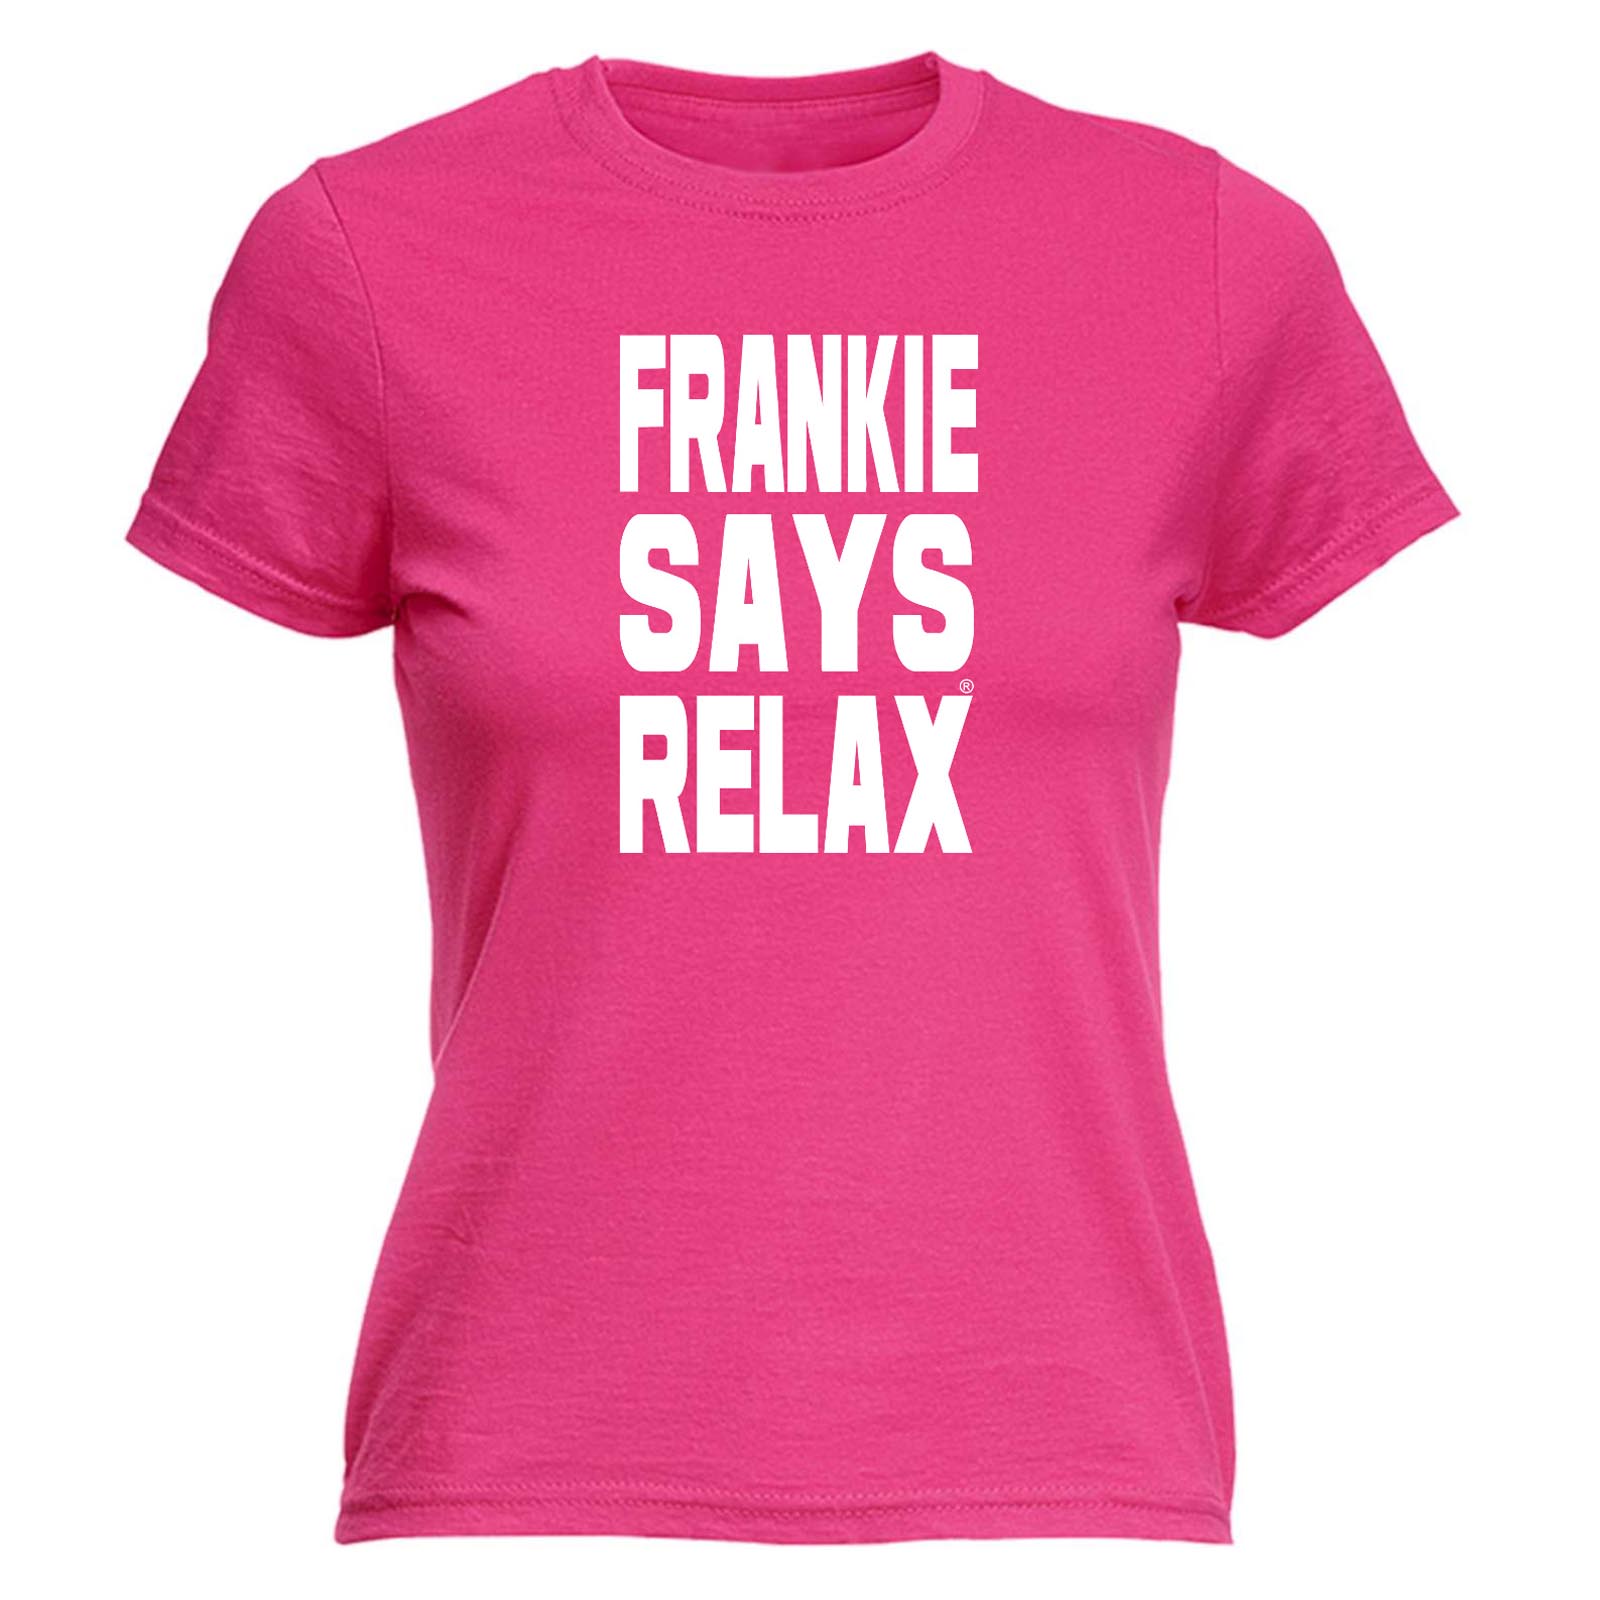 Funny Novelty Tops T-Shirt Womens tee TShirt Solid White Frankie Says Relax 